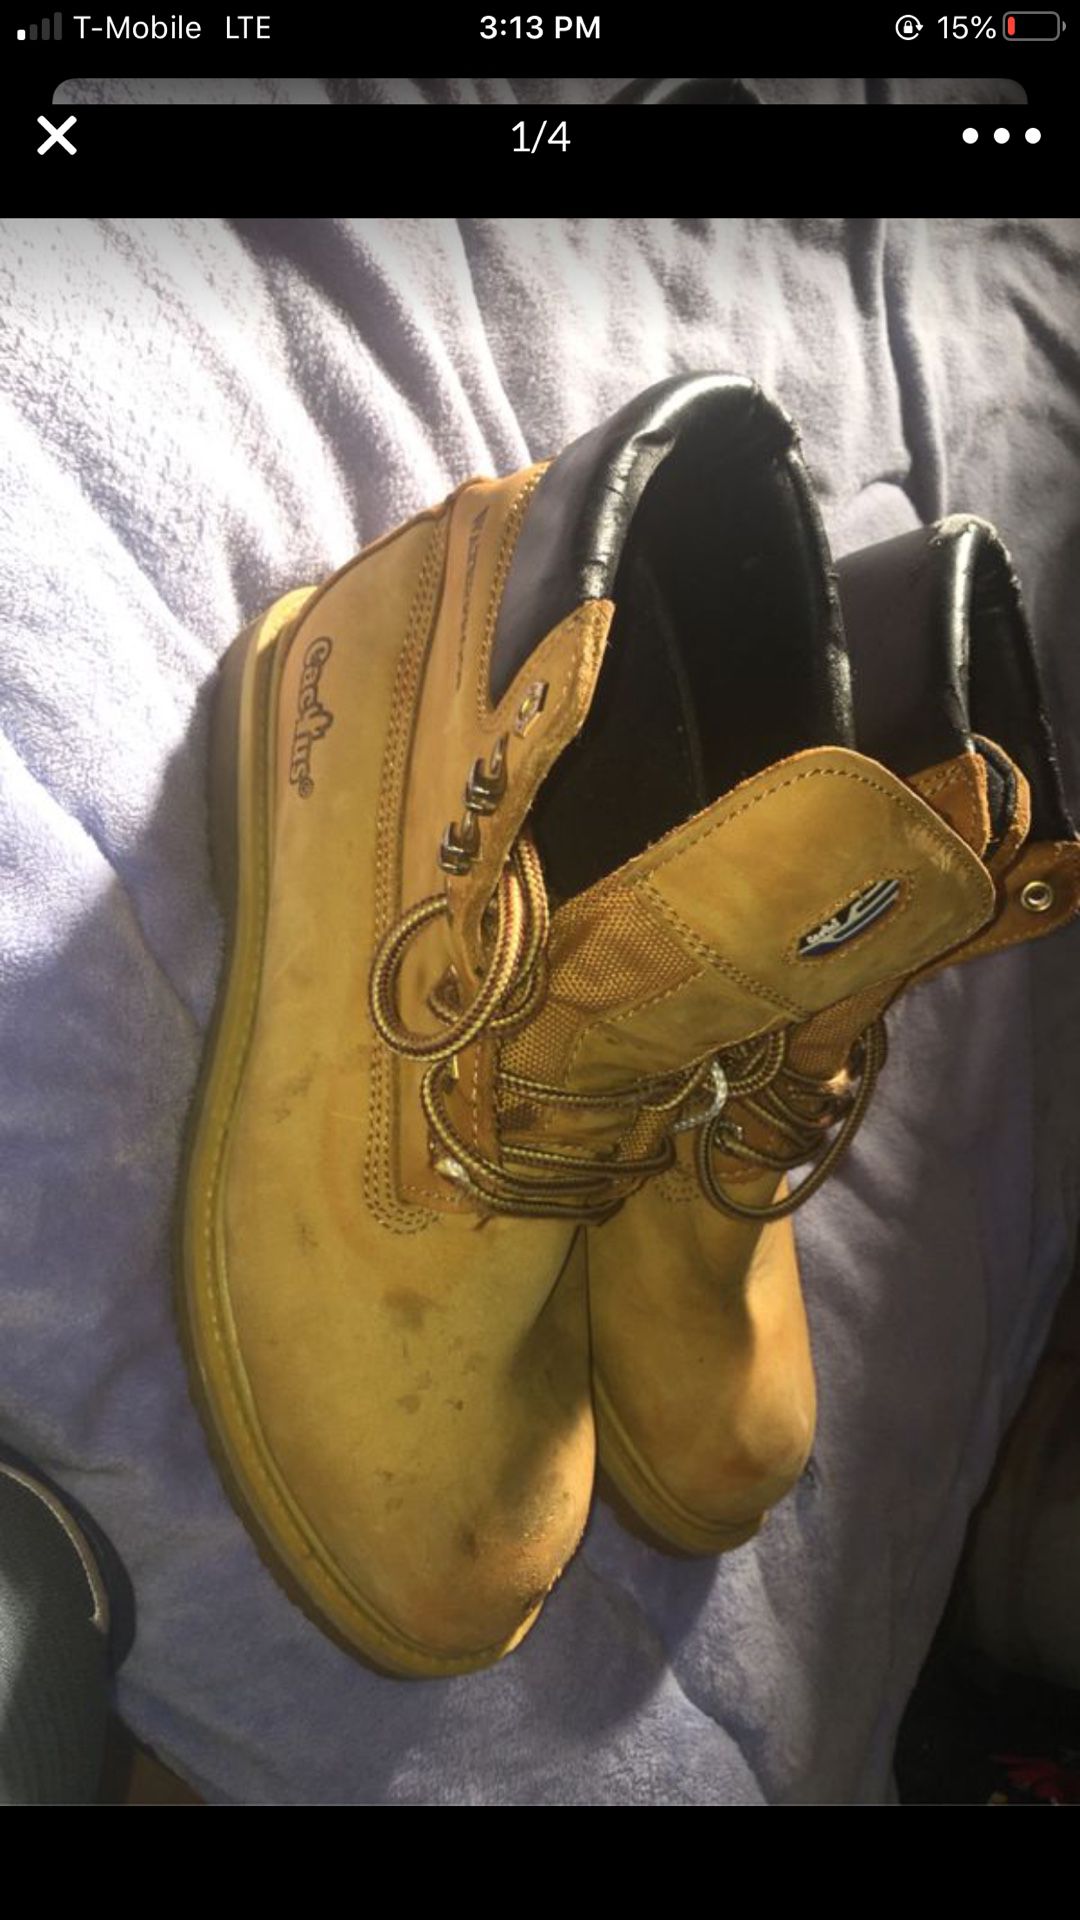 Cactus brown working boots size 8 in good condition